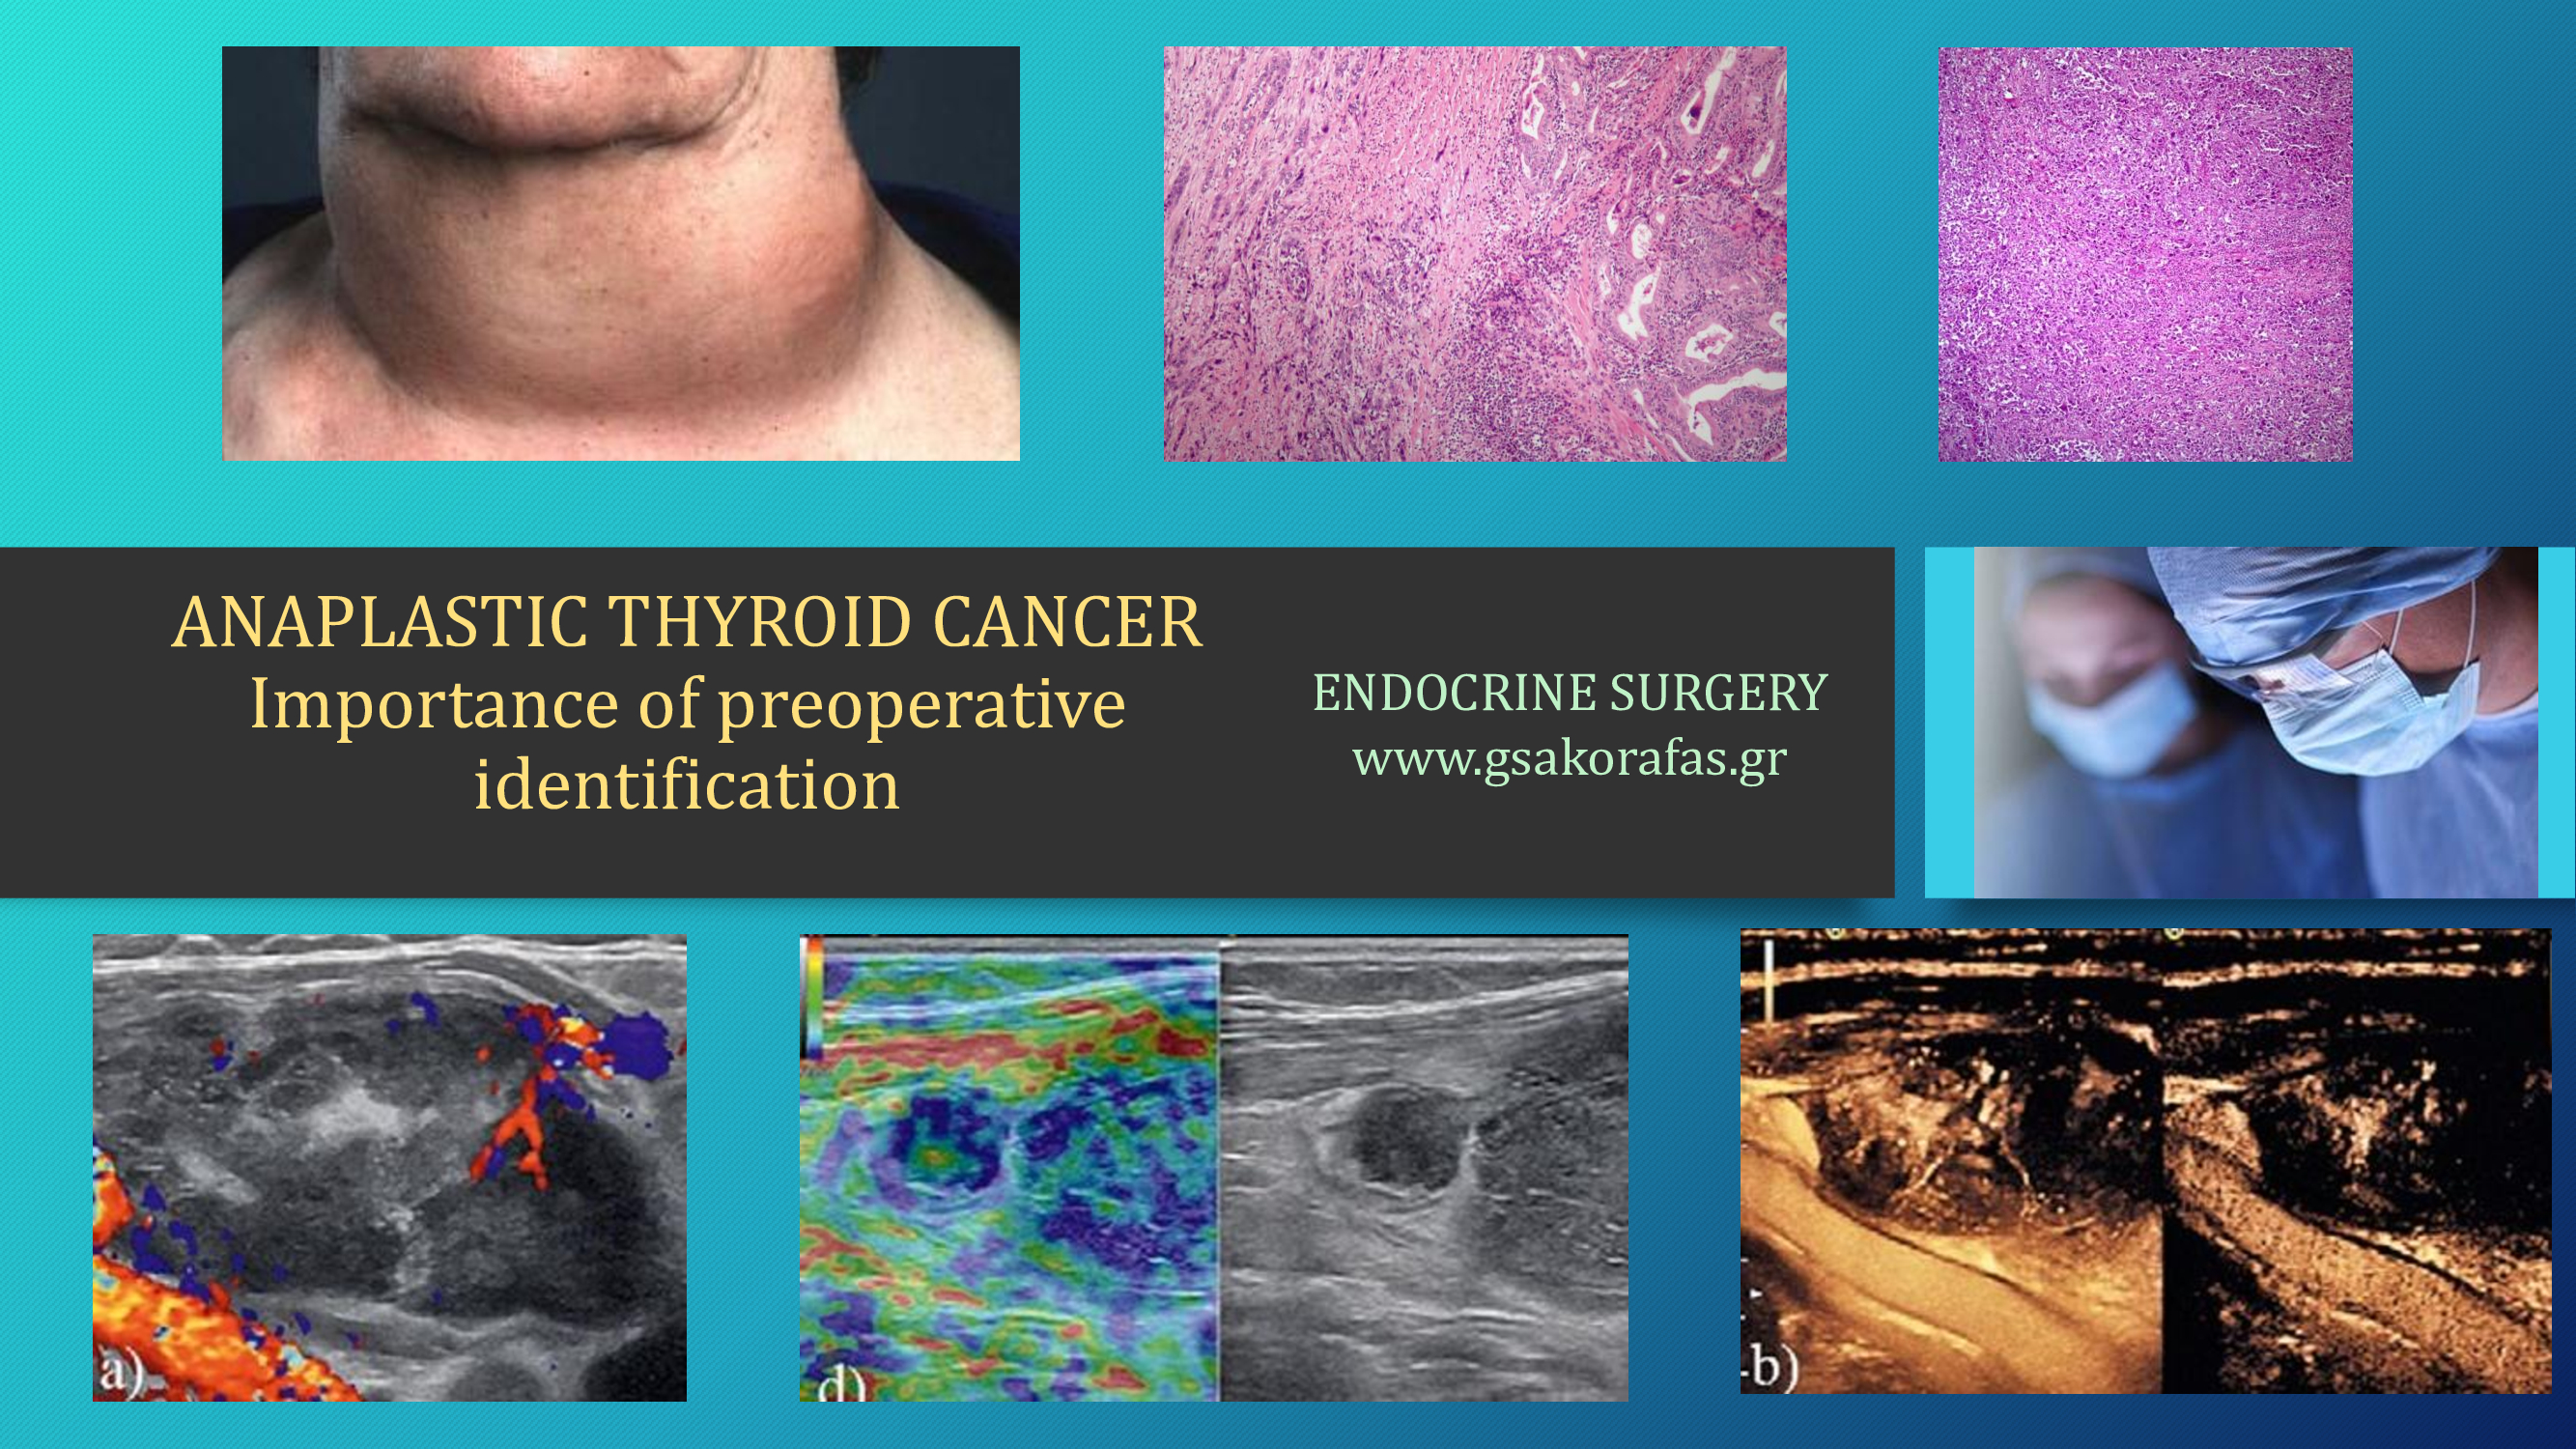 ANAPLASTIC THYROID CANCER – Importance of preoperative diagnosis